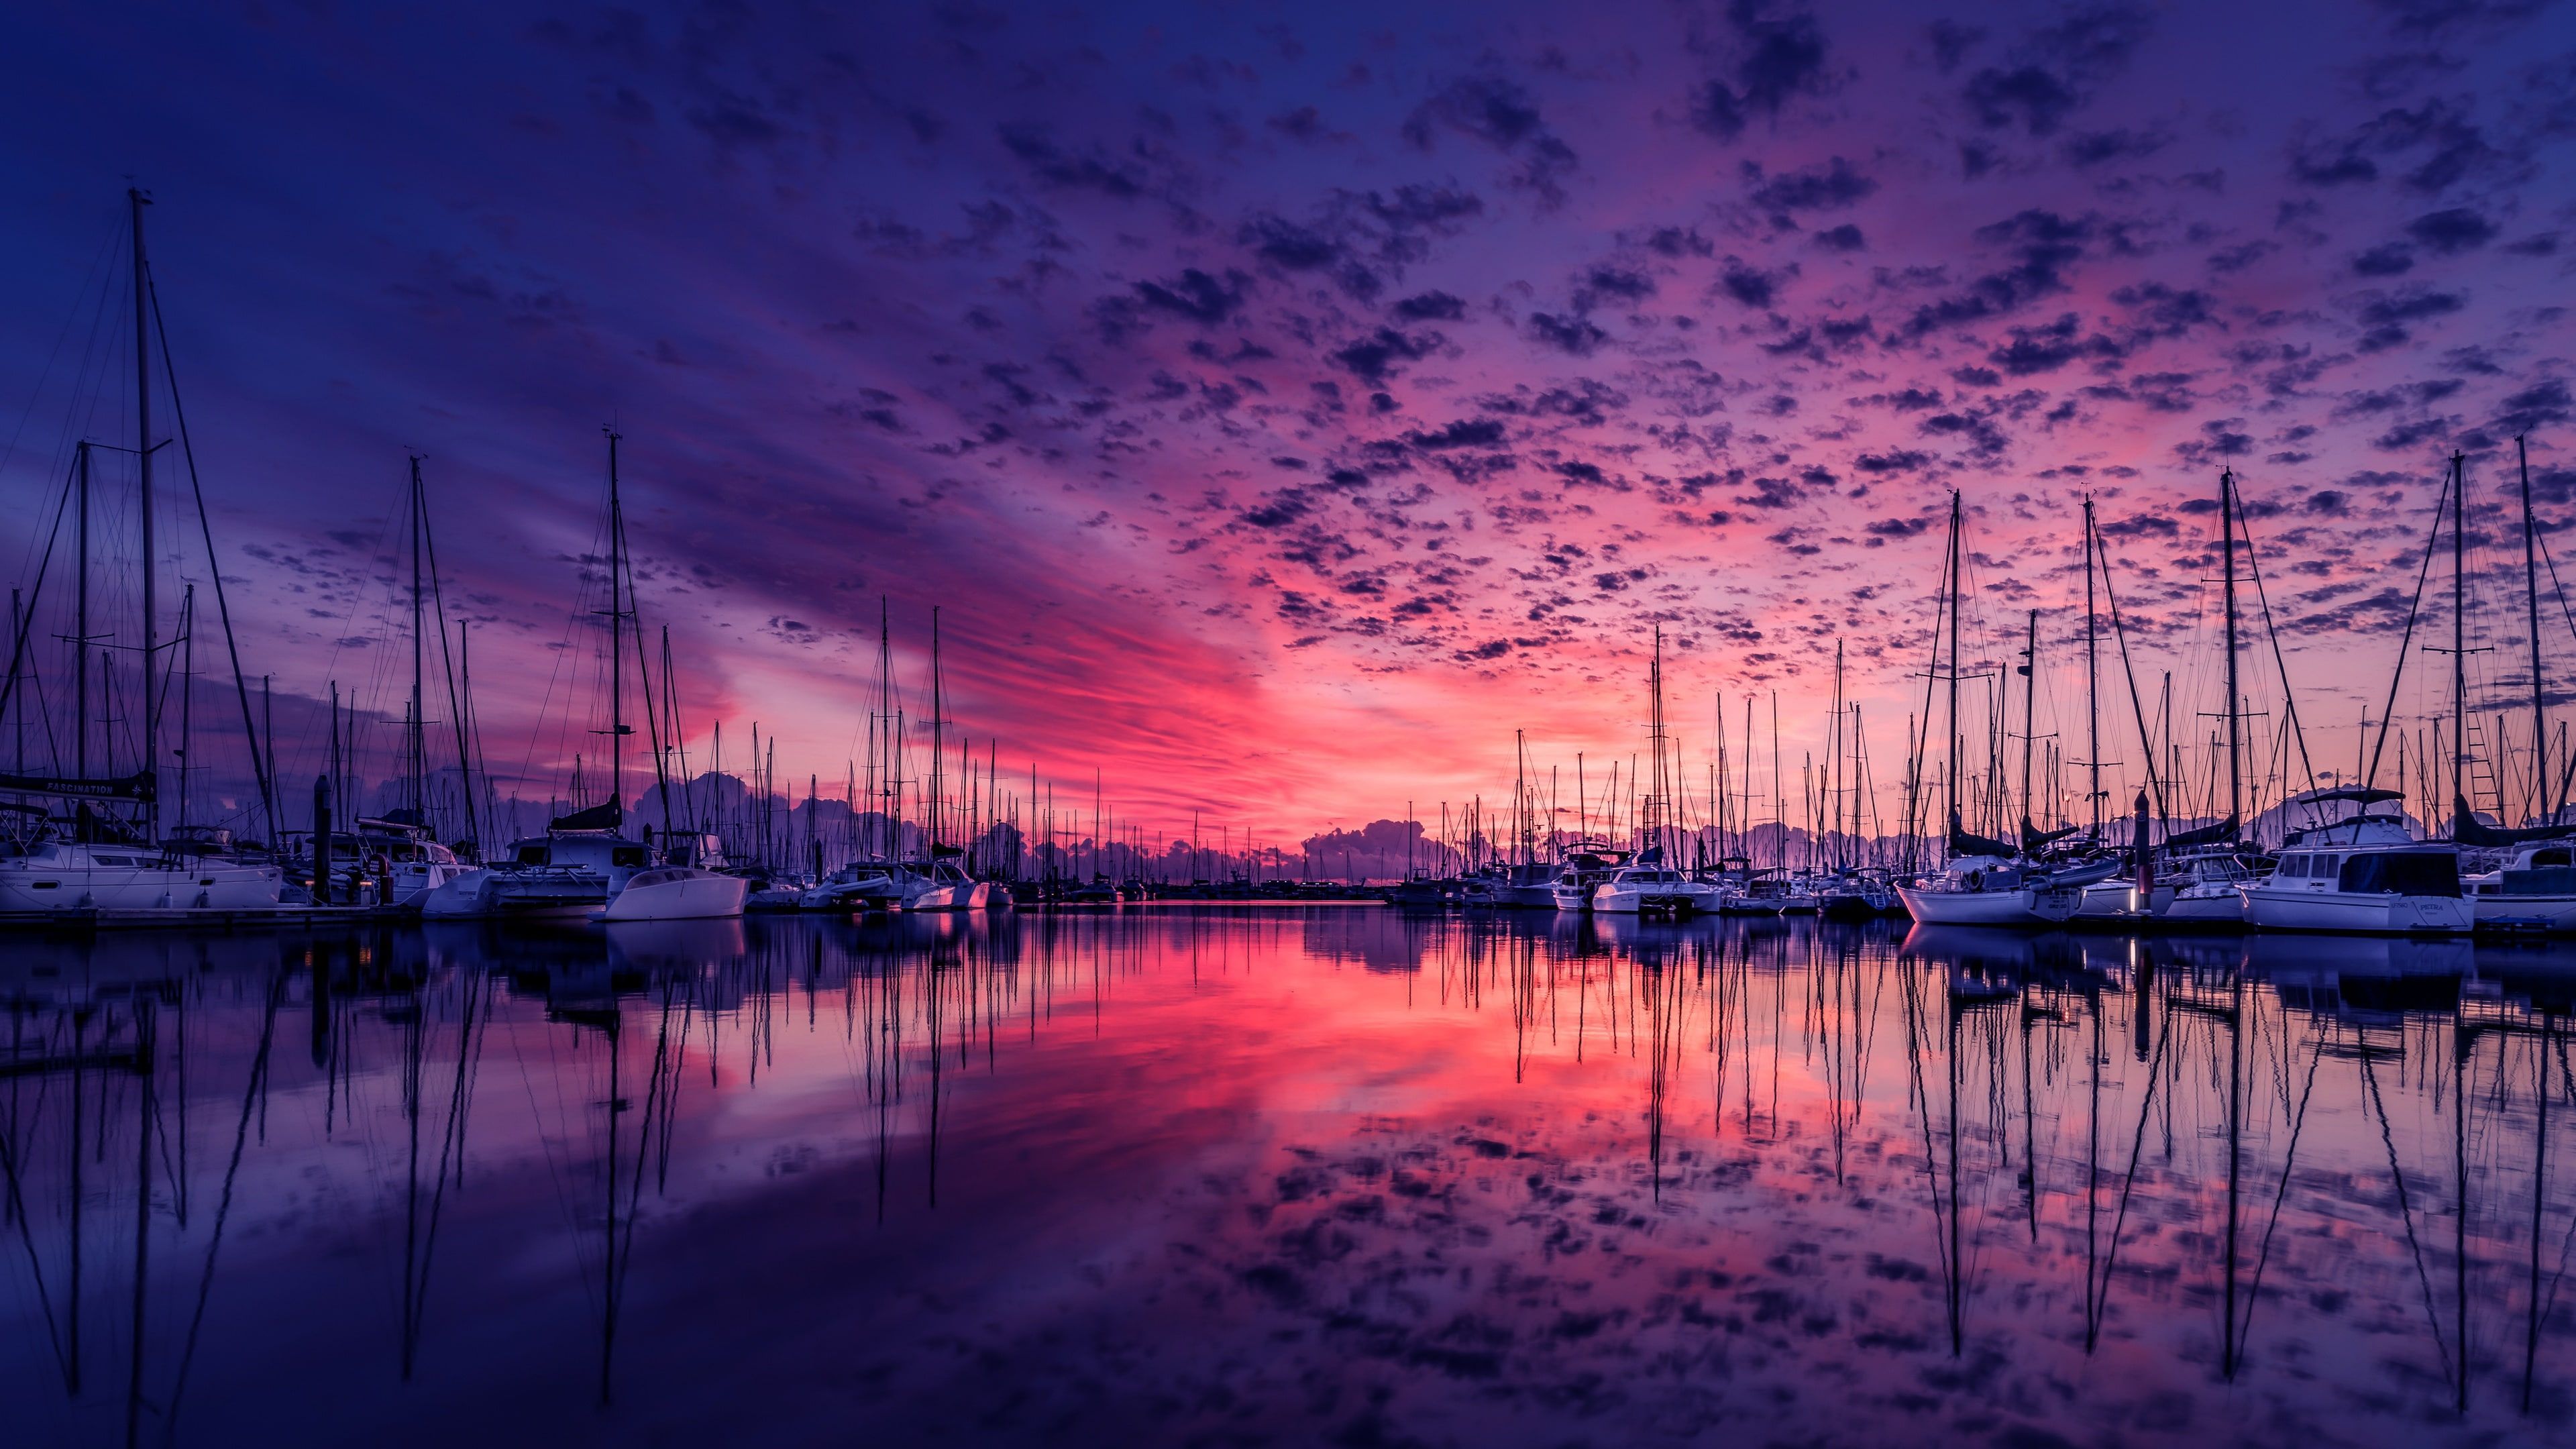 afterglow purple clouds pink sky #dock #boat #water #dusk #evening purple sky #reflection #horizon #calm #sunset #marina #wate. Pink sky, Clouds, Nature picture